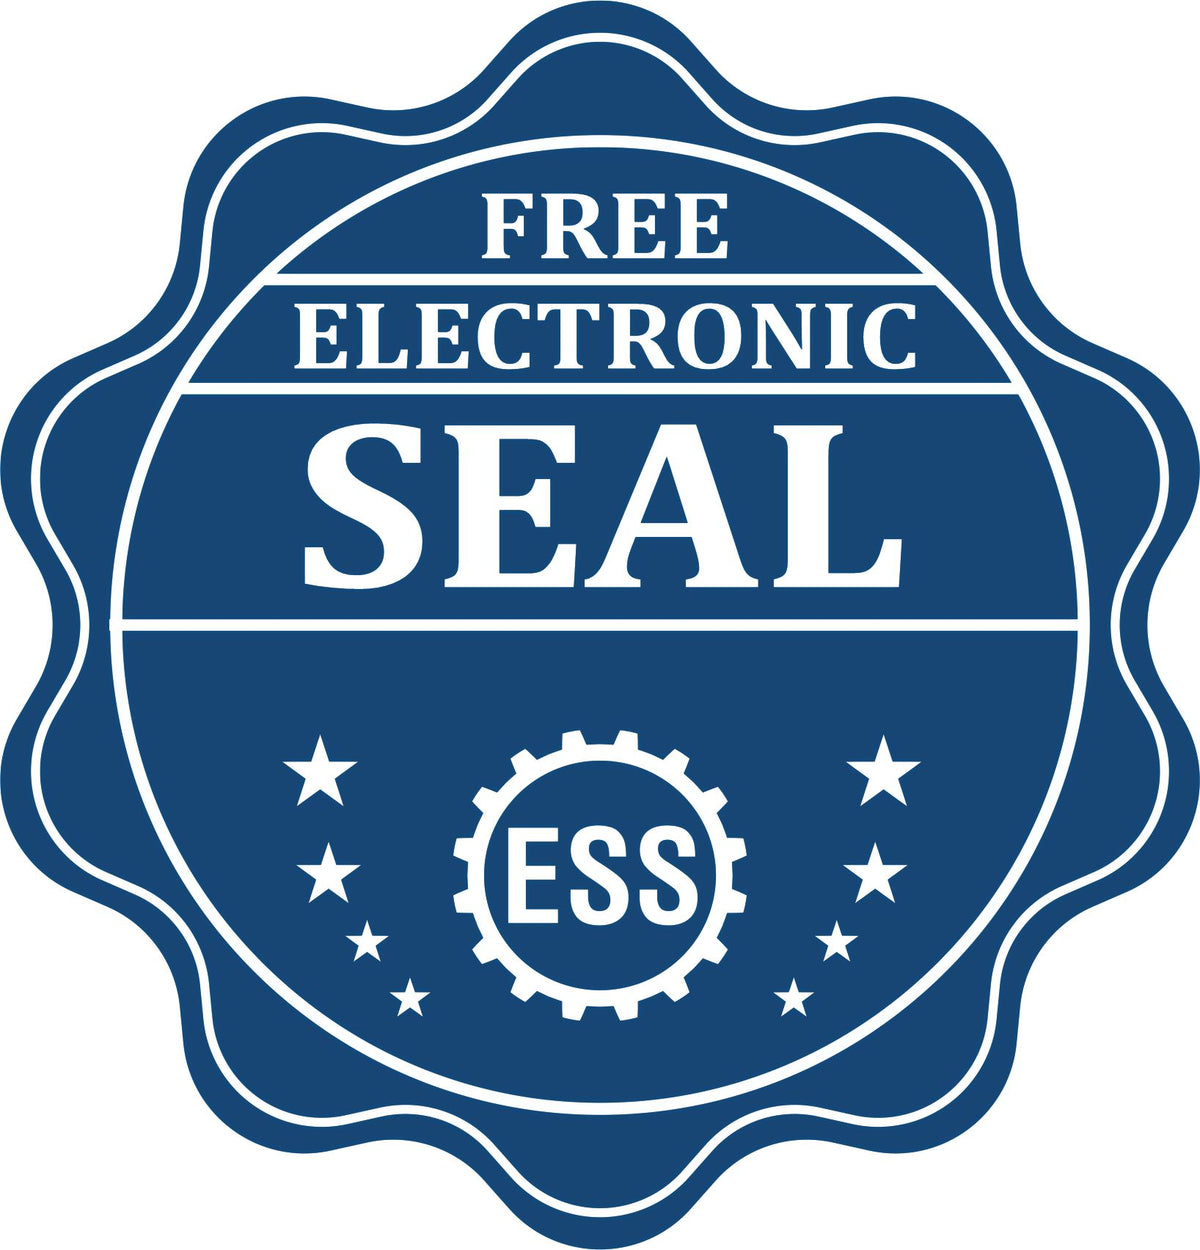 A badge showing a free electronic seal for the Premium MaxLight Pre-Inked Michigan Geology Stamp with stars and the ESS gear on the emblem.